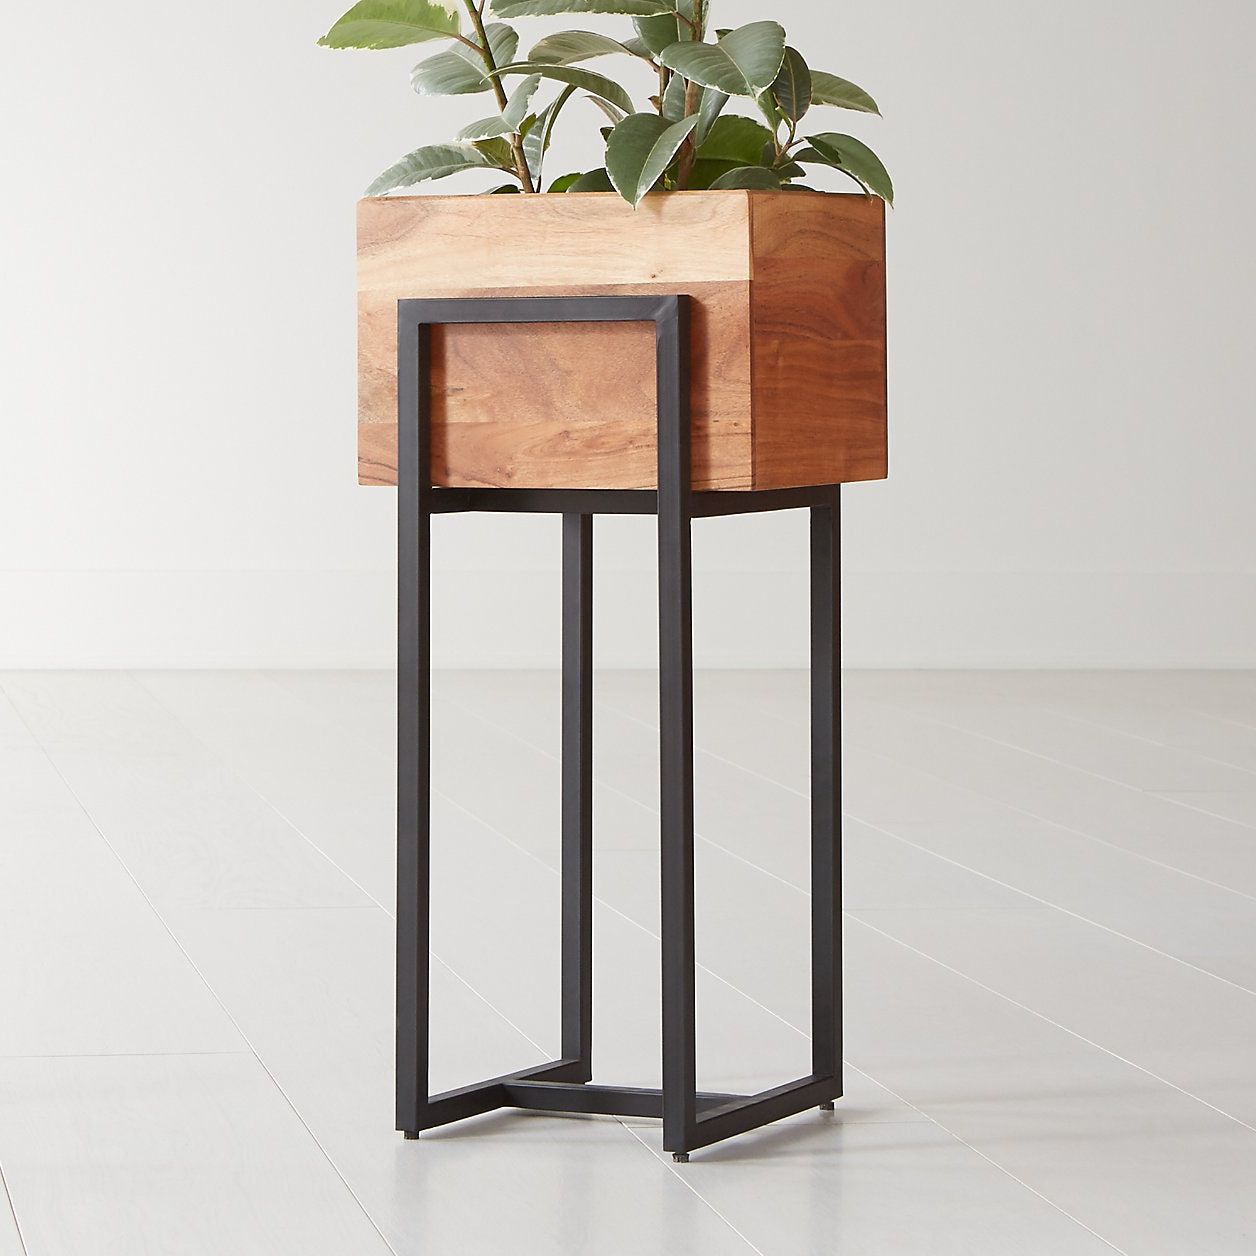 Modern Plant Stands Within Popular 15 Best Indoor Plant Stands That Seriously Stand Out (View 11 of 15)